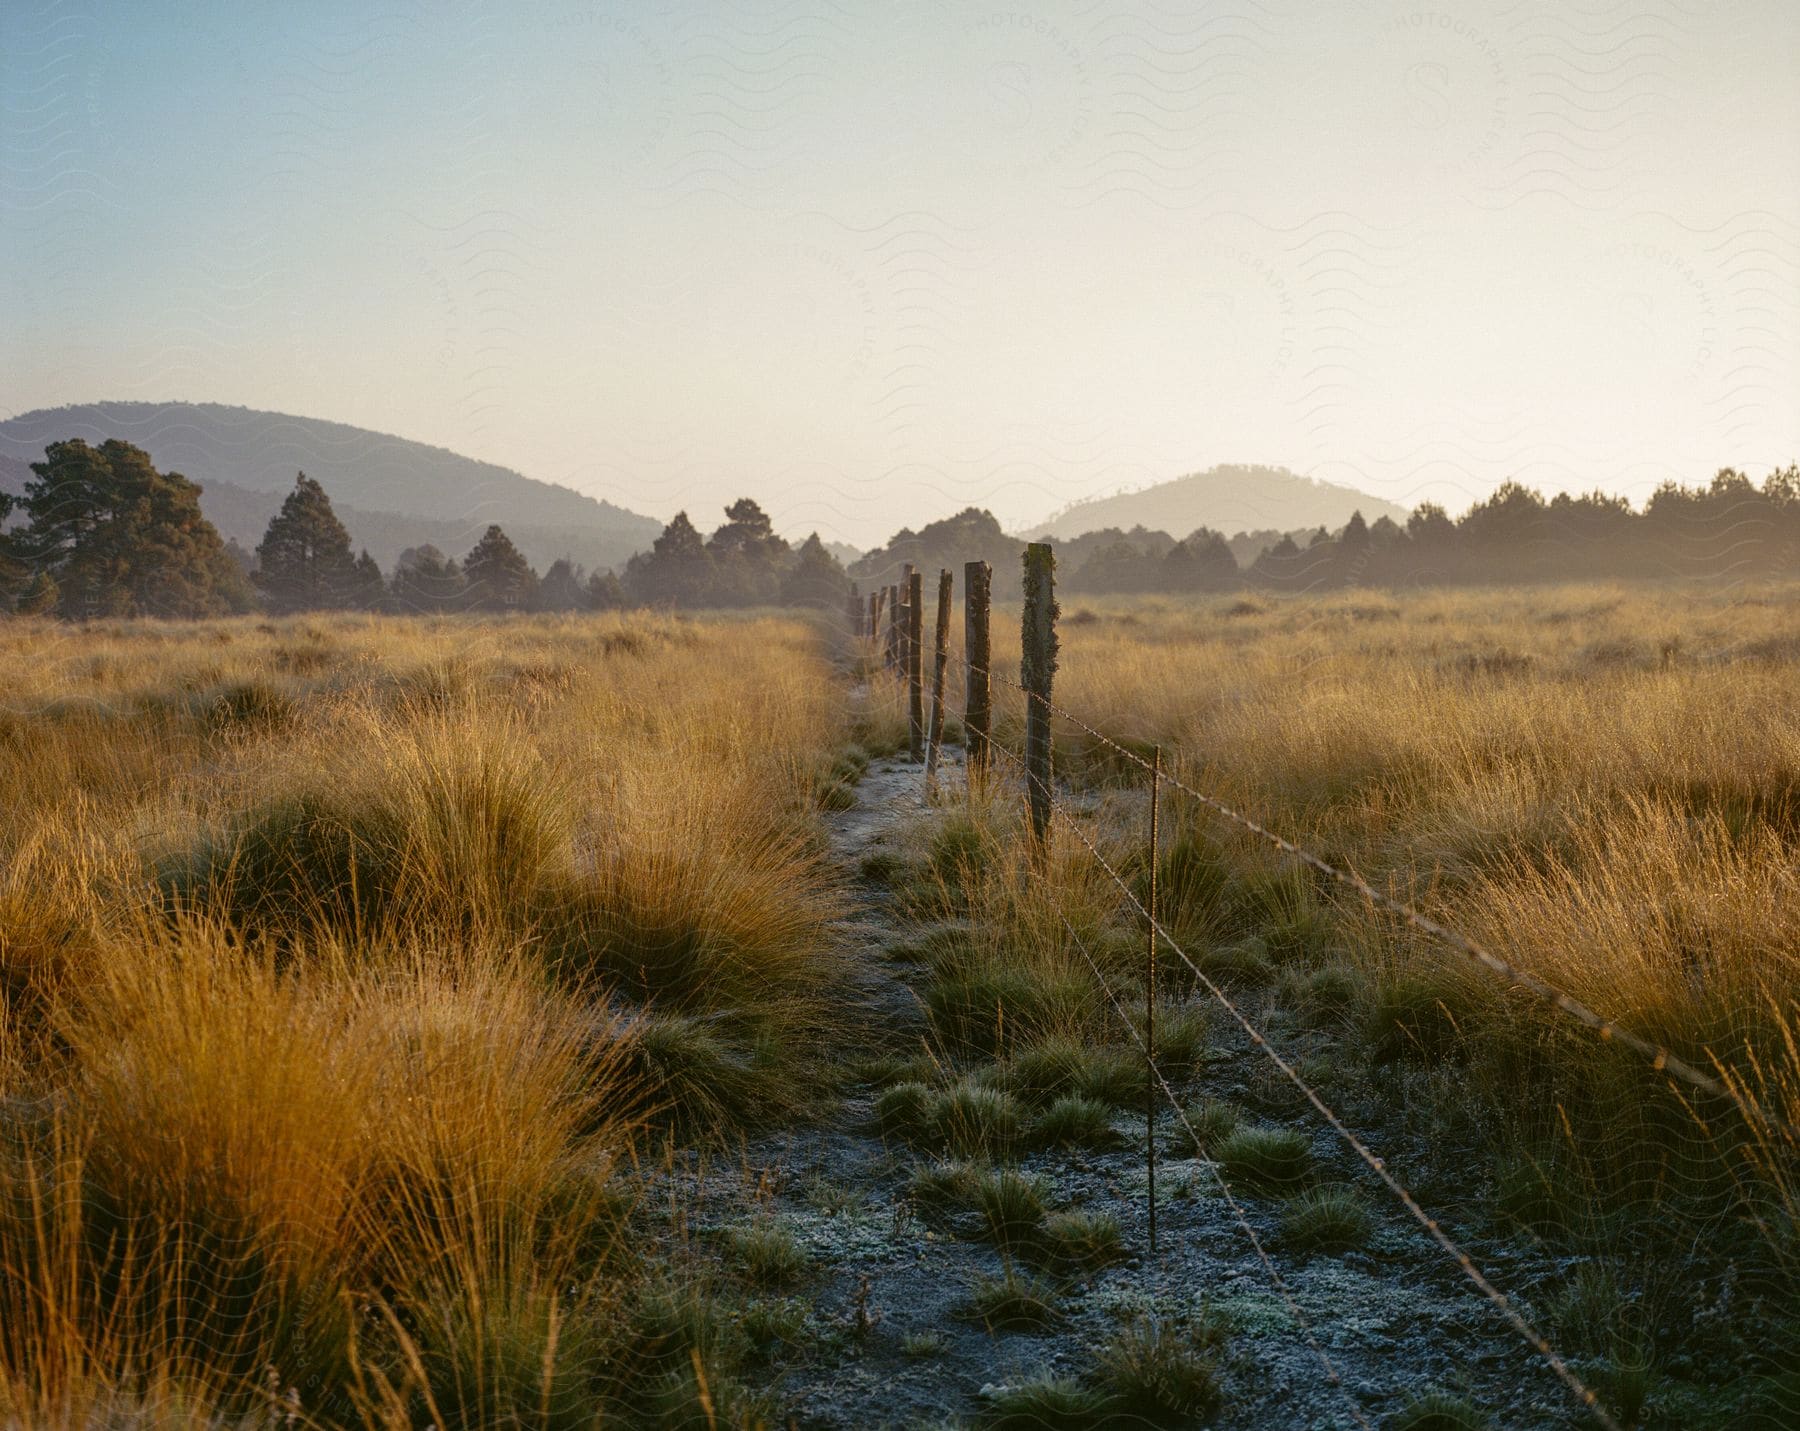 Fence posts run through wet ground between fields with misty mountains in the background